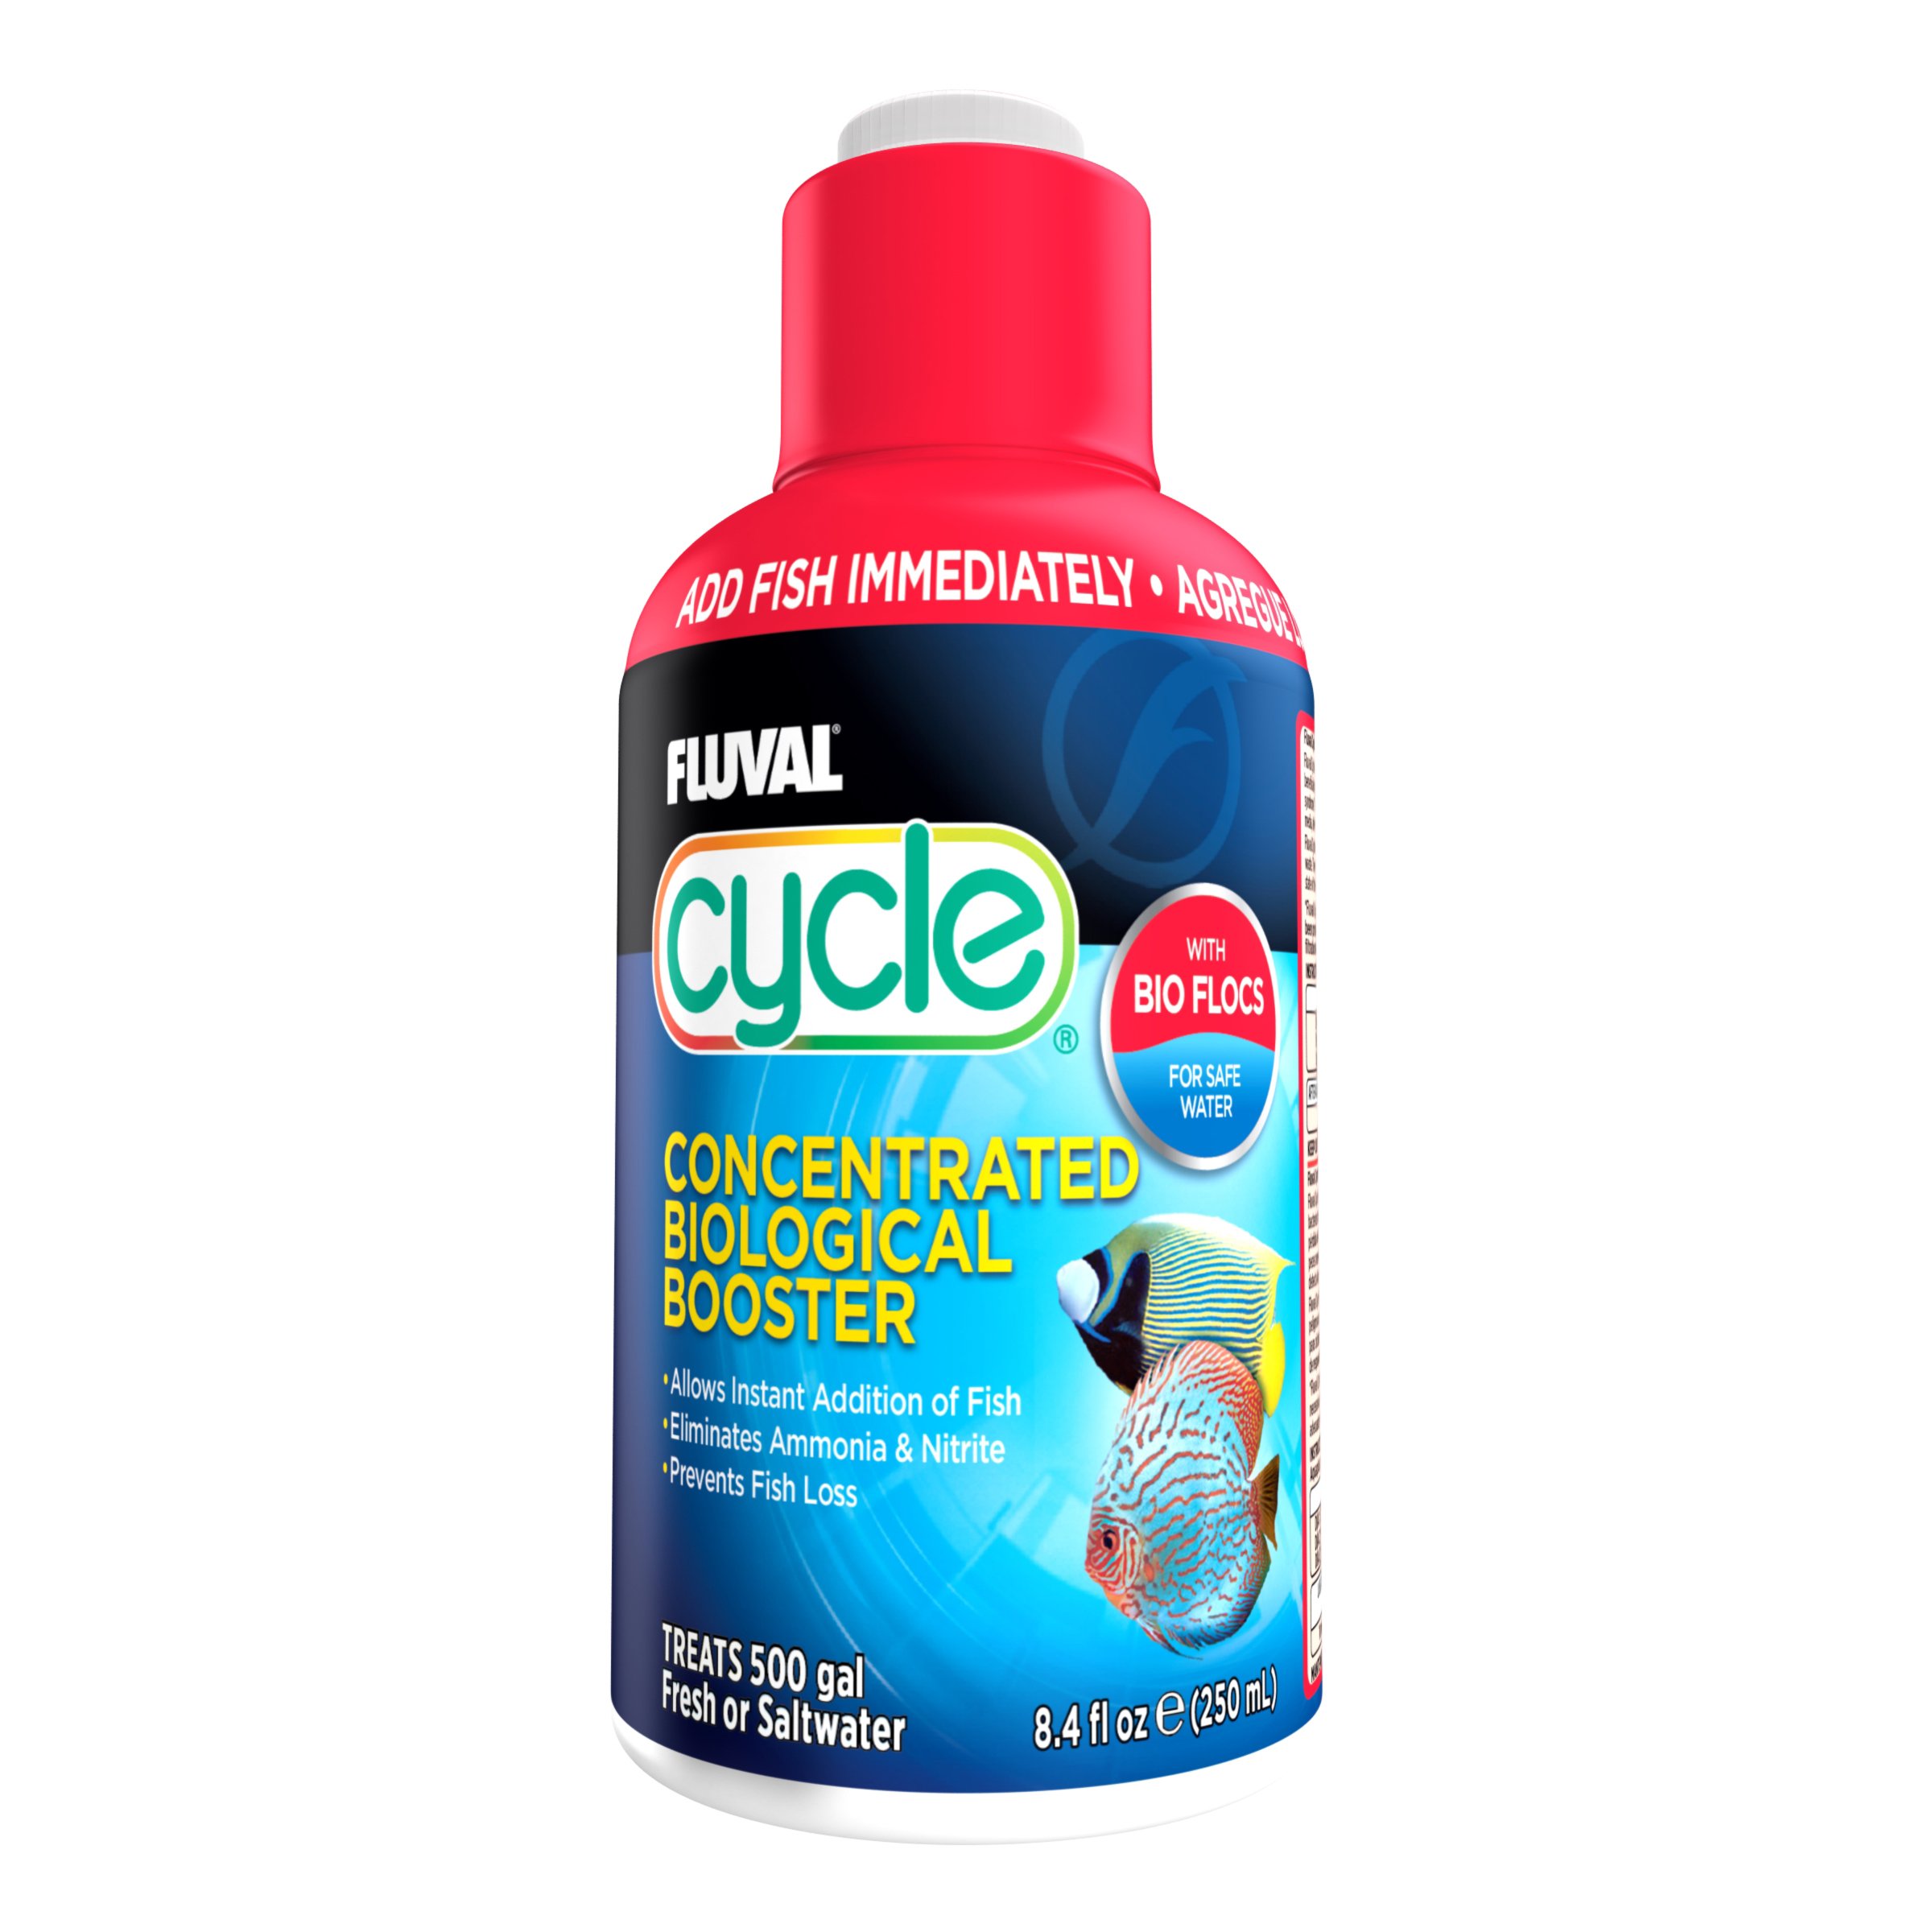 Cycle Biological Enhancer is an all-natural water care which creates a safe biological habitat to prevent fish loss and is Infused with a powerful team of beneficial bacteria that immediately inoculates aquarium water